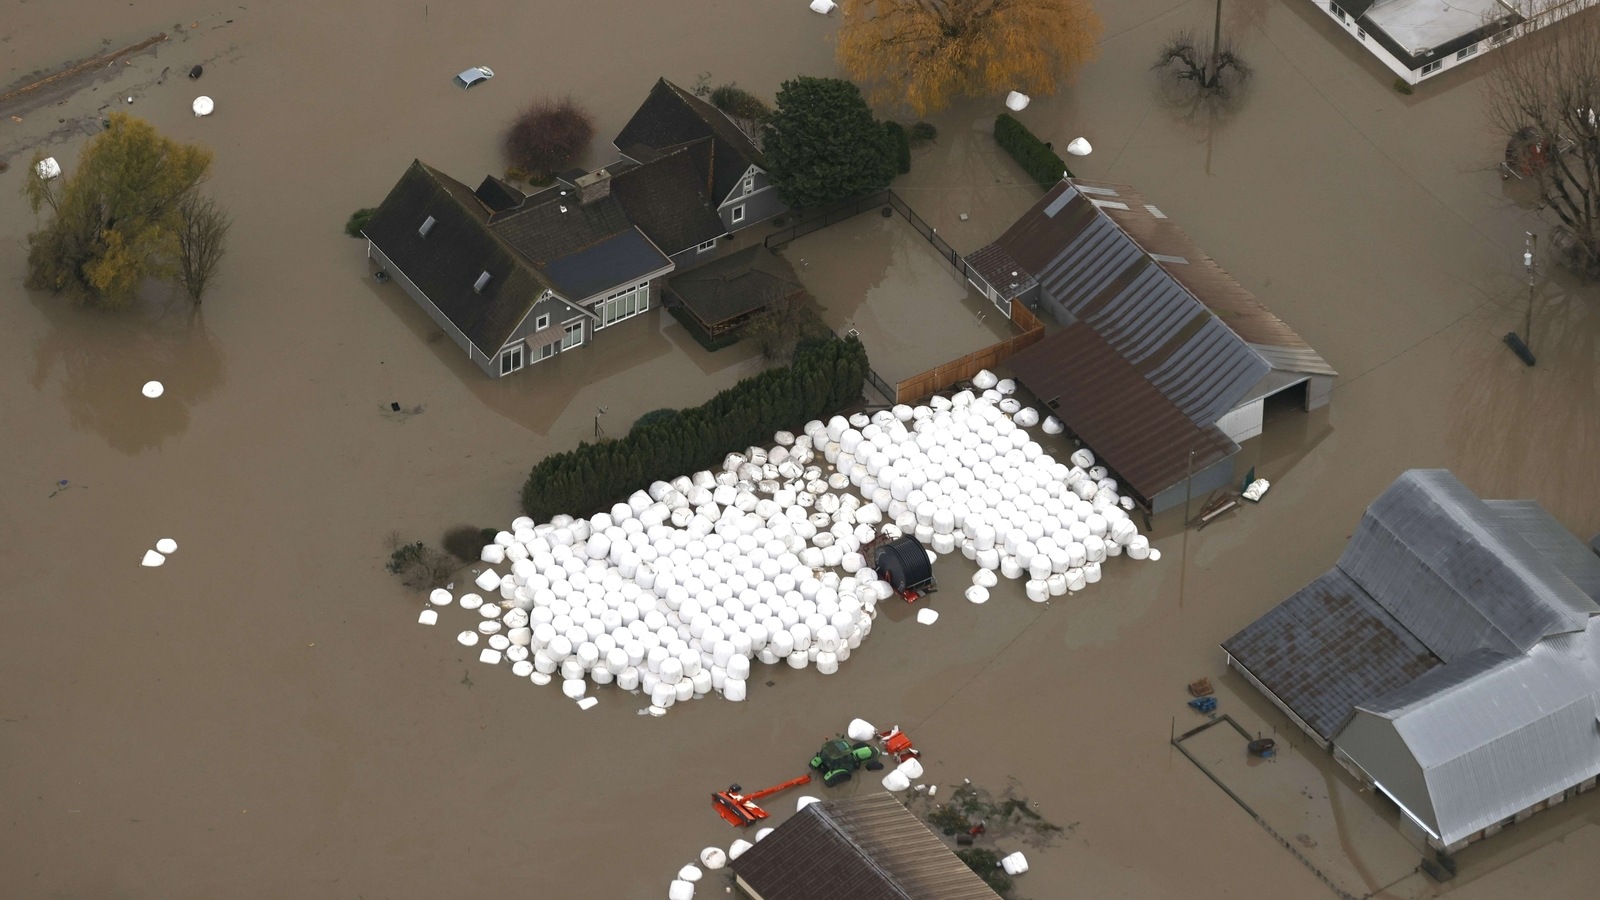 Flooding in western Canada: 1 person still missing as death toll ...